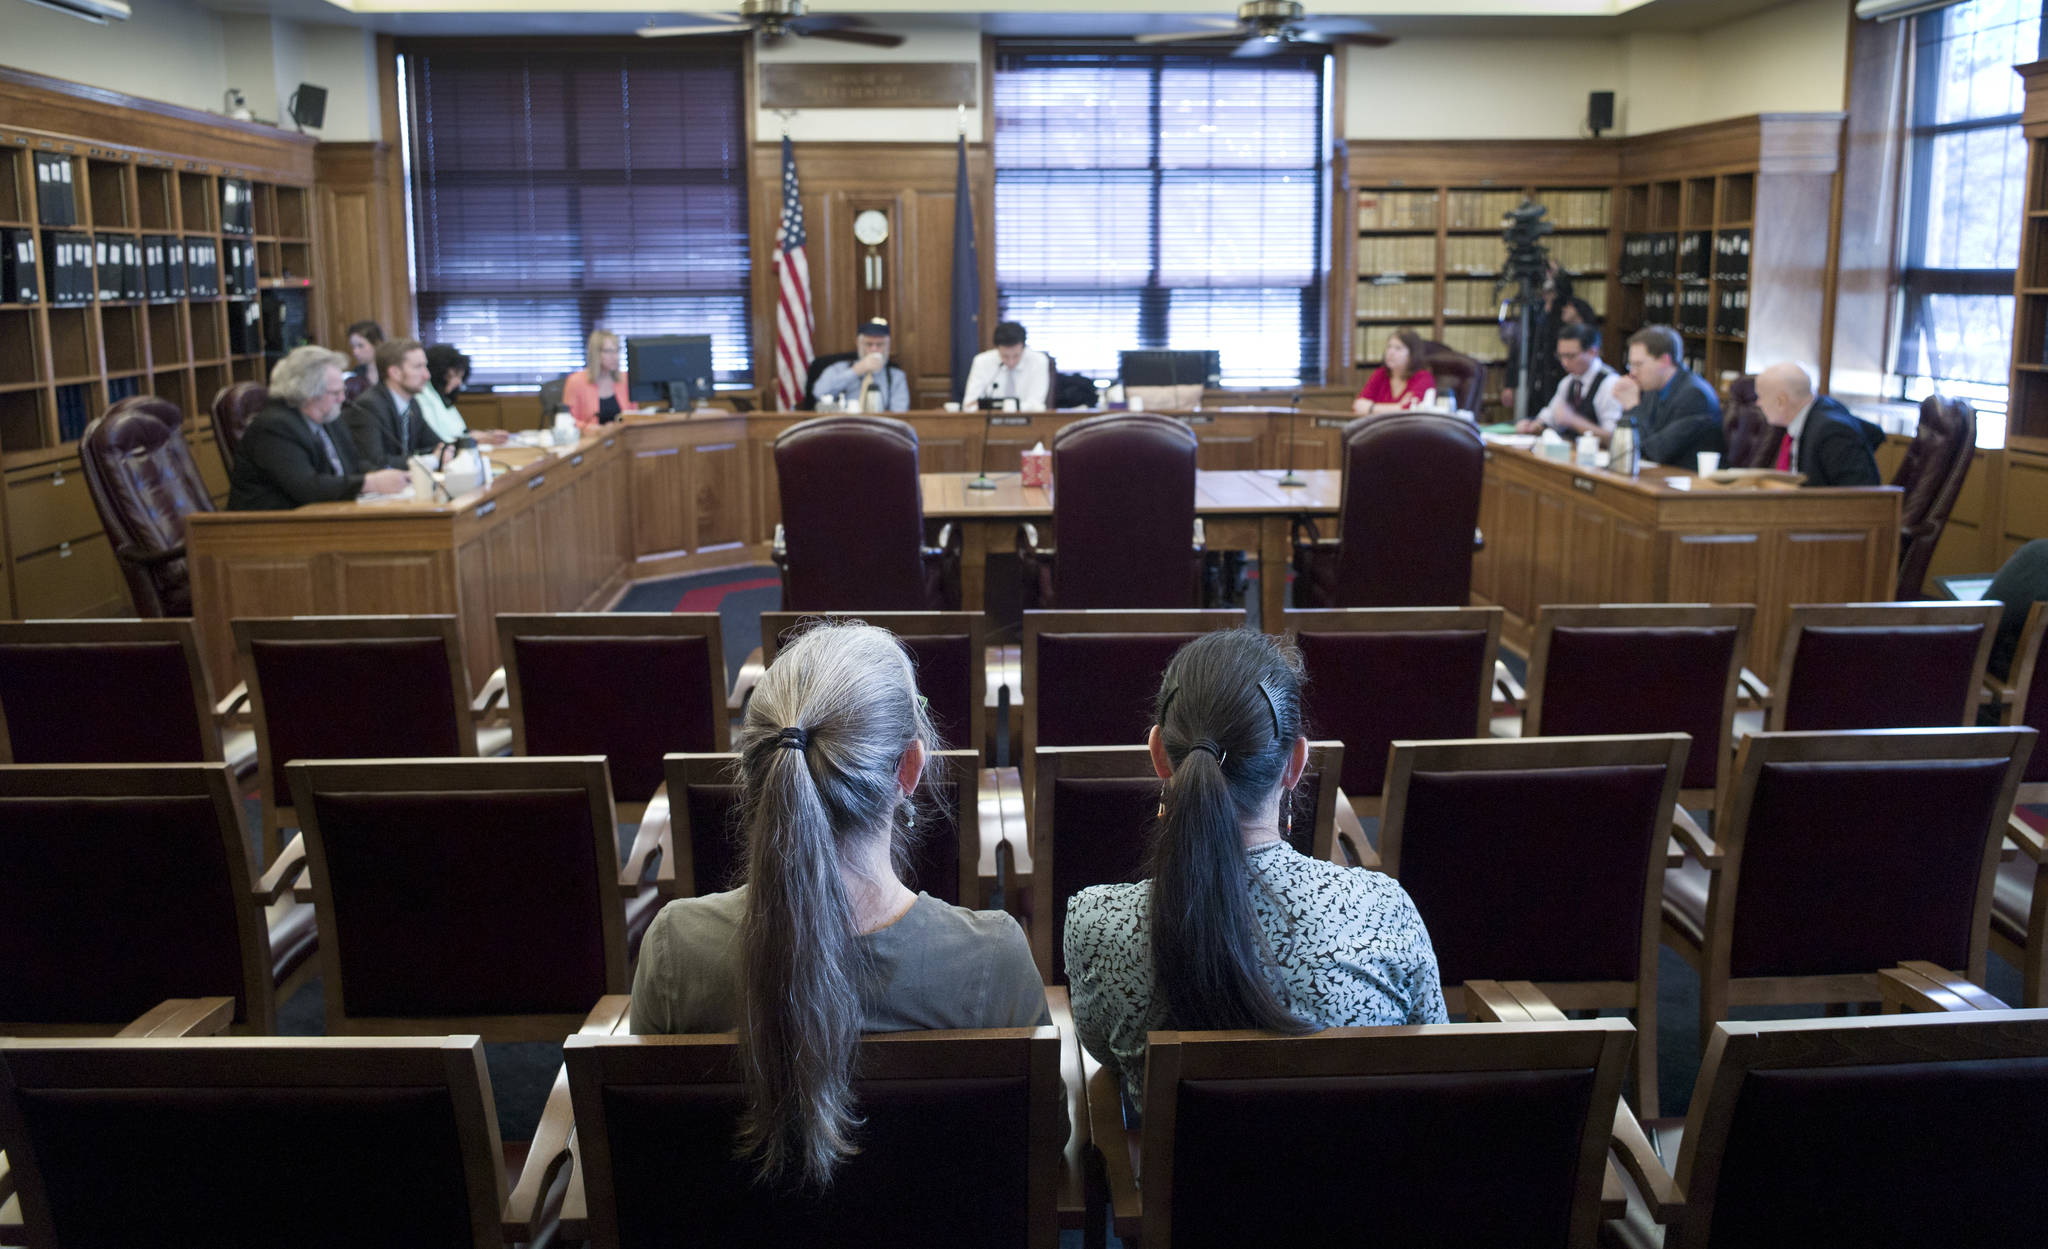 Luann McVey, left, and Laura Stats sit in the mostly vacant public seating area after giving their public testimony on SB 26 to the House Finance Committee at the Capitol on Monday, April 10, 2017. (Michael Penn | Juneau Empire)